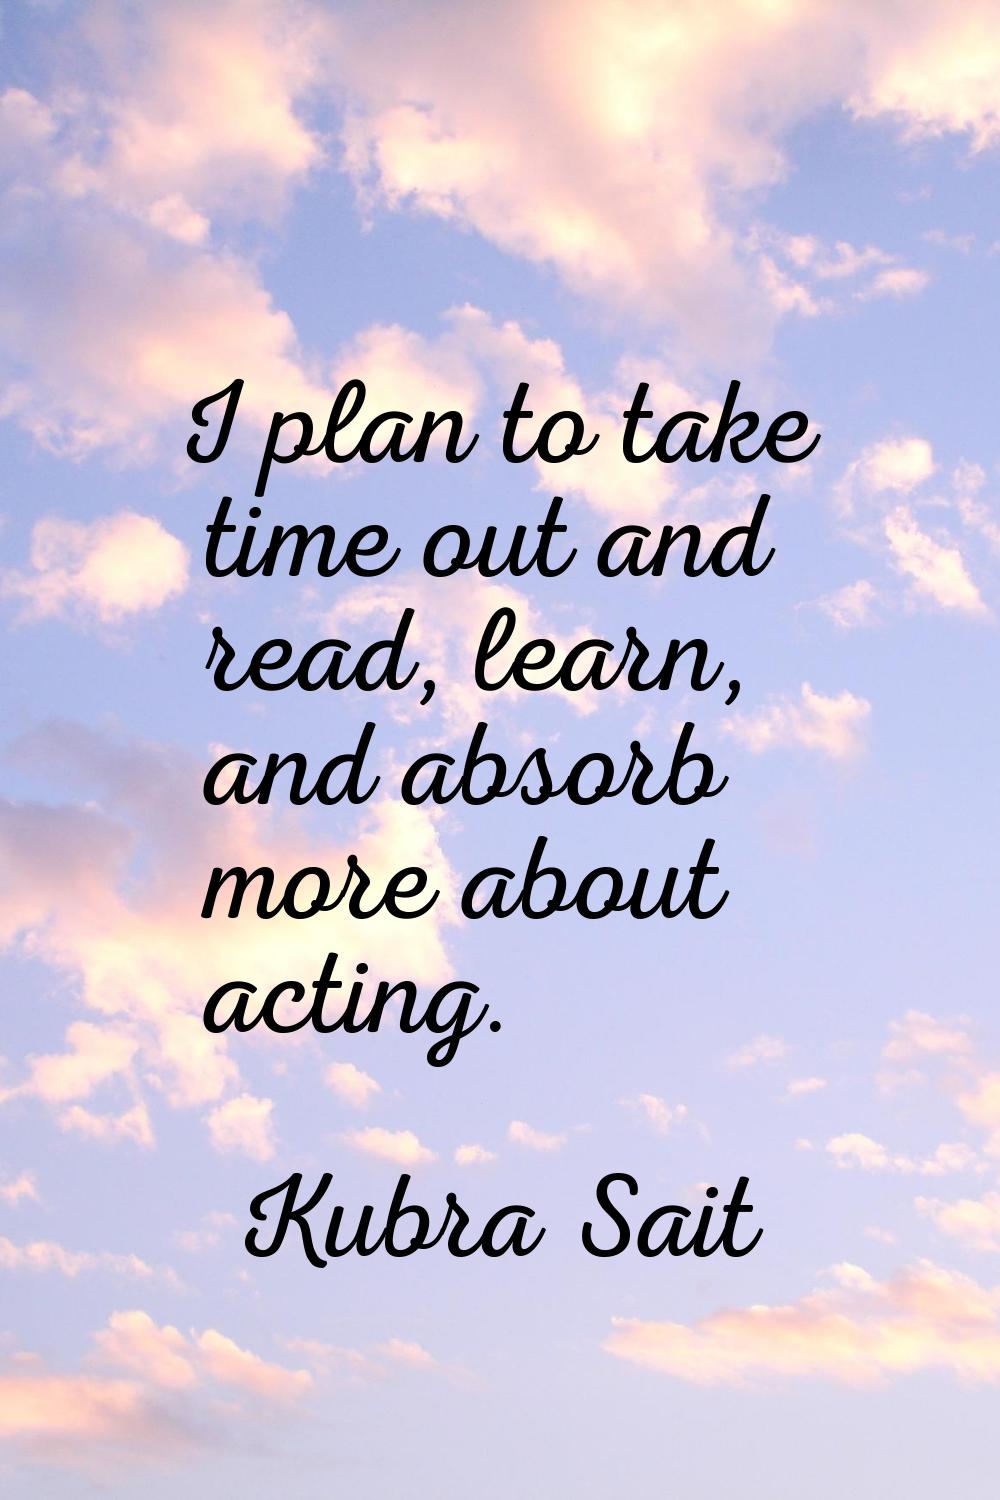 I plan to take time out and read, learn, and absorb more about acting.